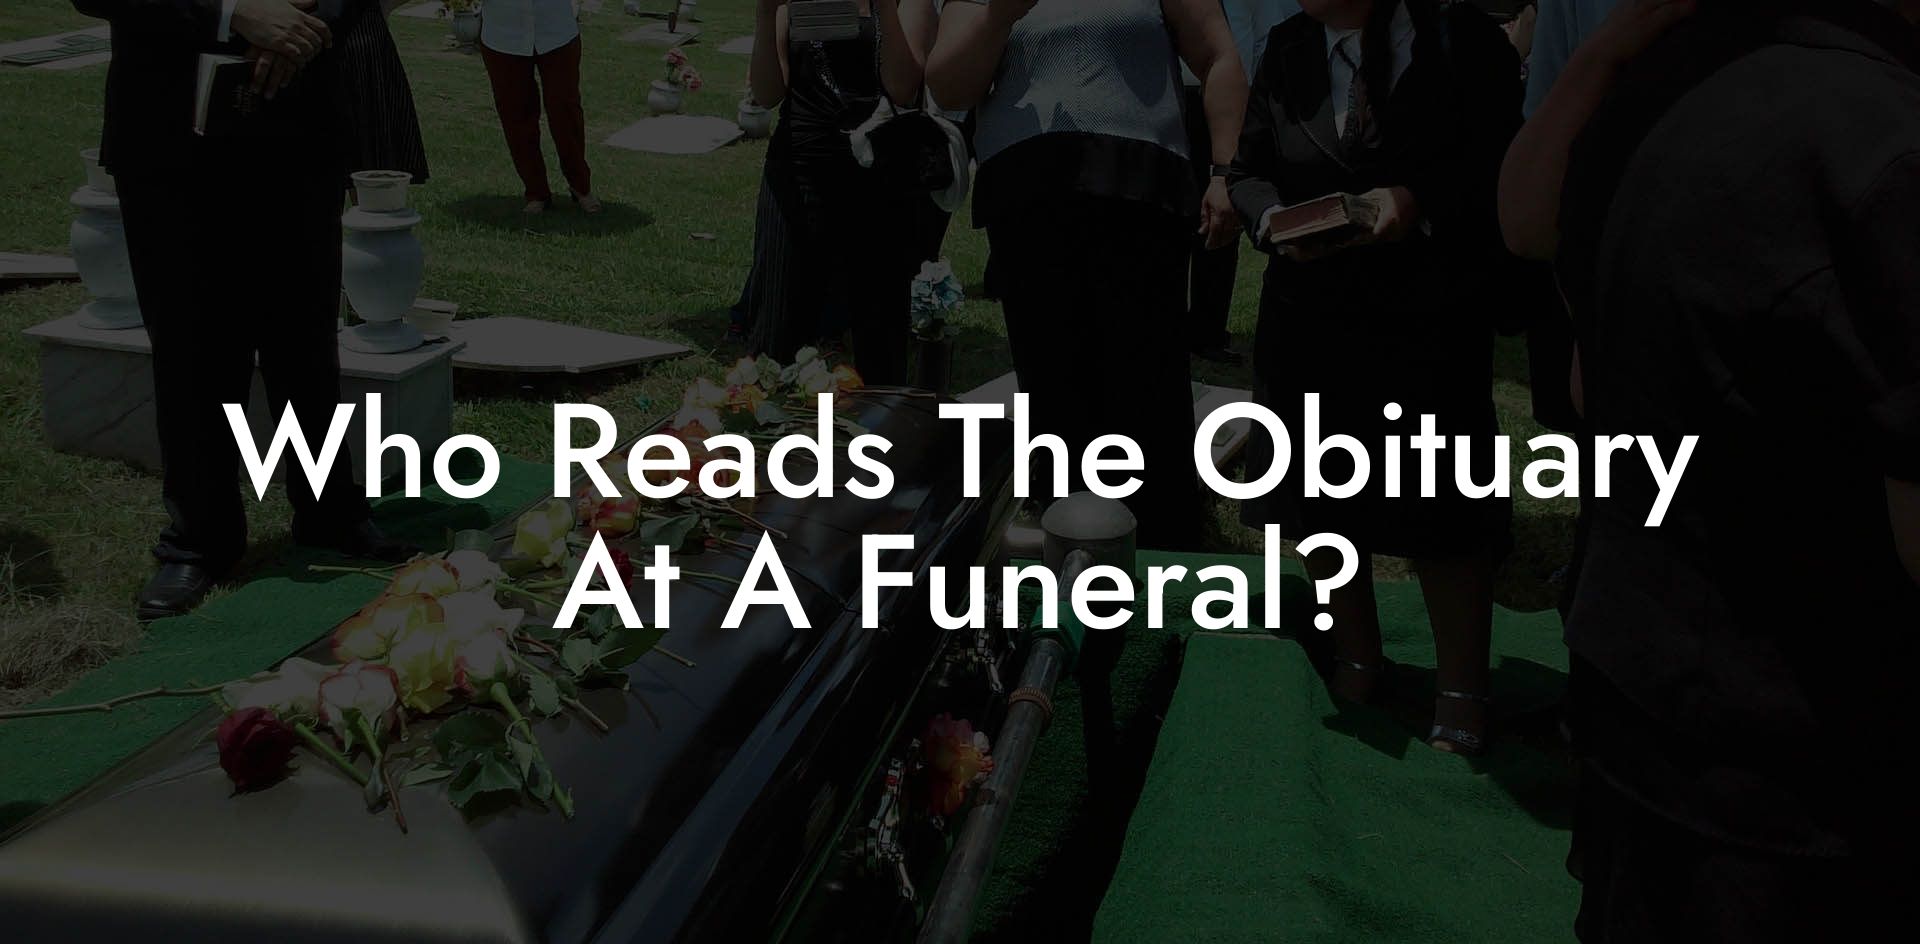 Who Reads The Obituary At A Funeral?